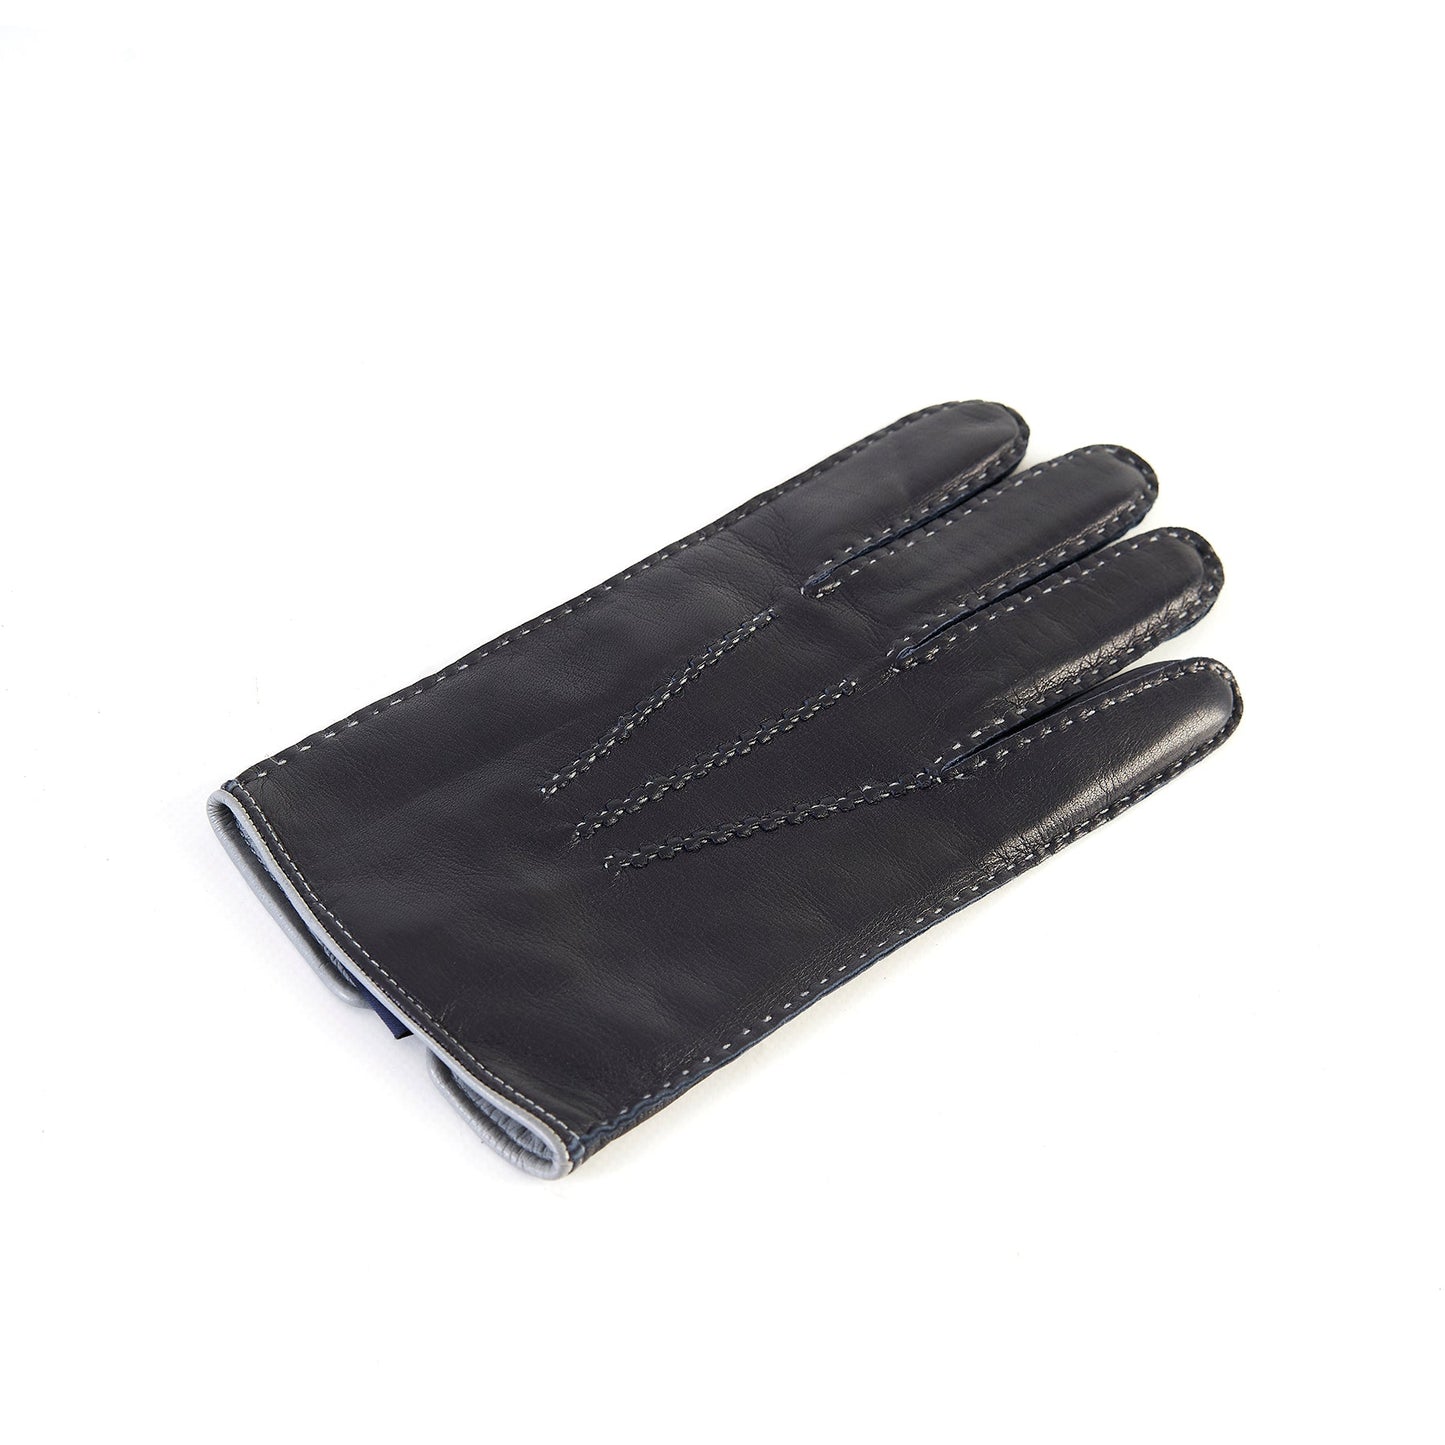 Bespoke Men's fully hand-stitched nappa leather gloves and cashmere lining